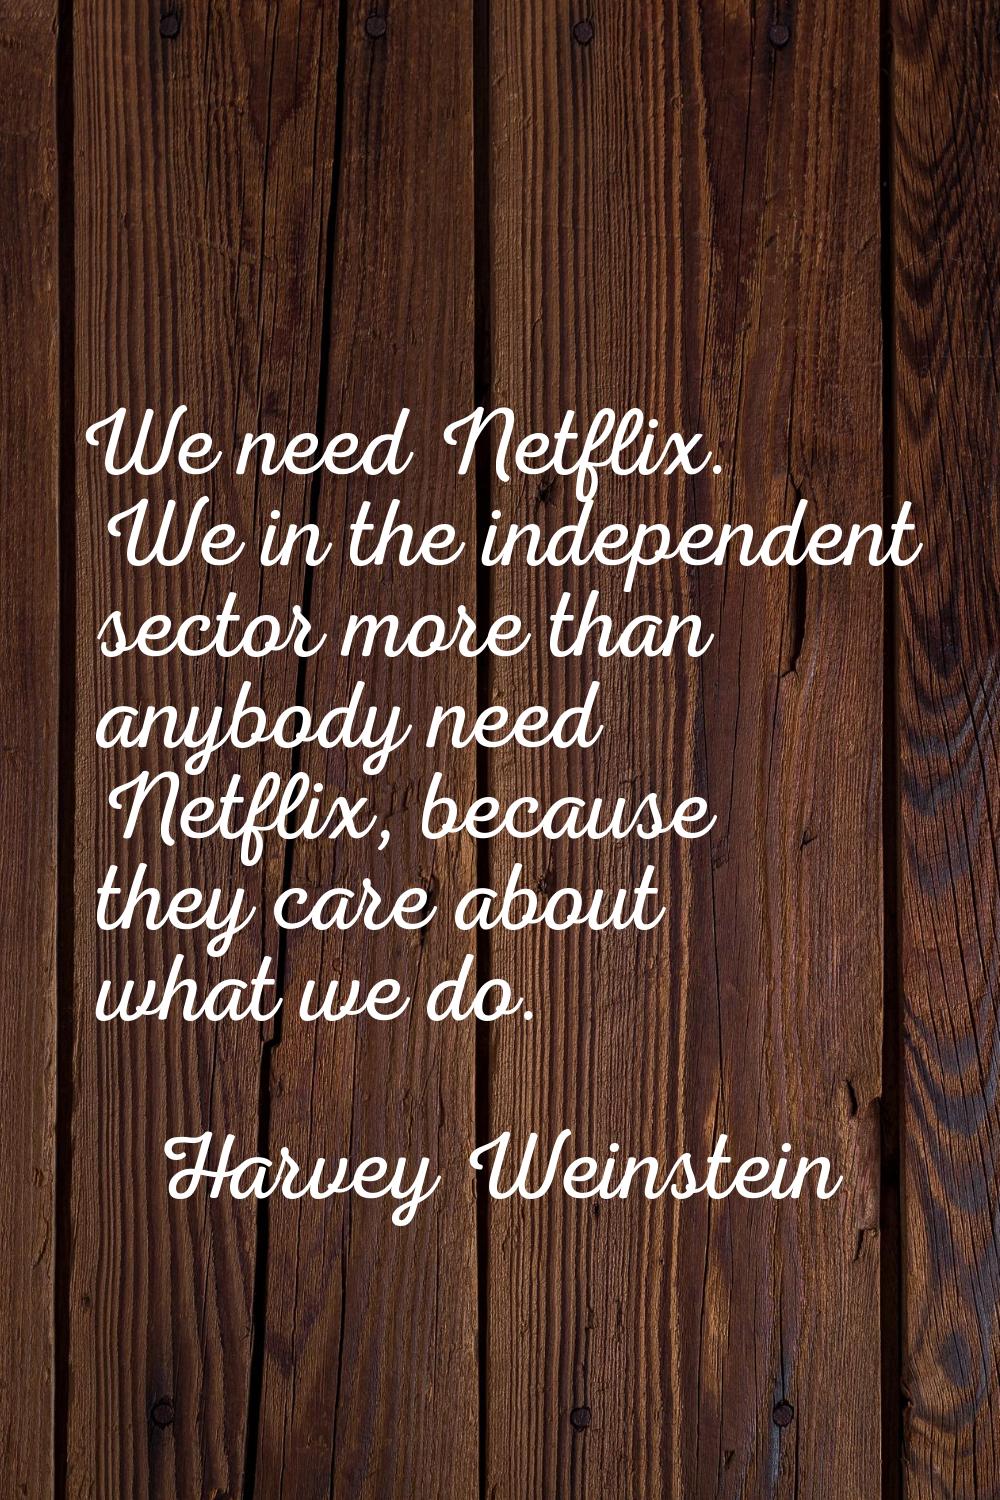 We need Netflix. We in the independent sector more than anybody need Netflix, because they care abo